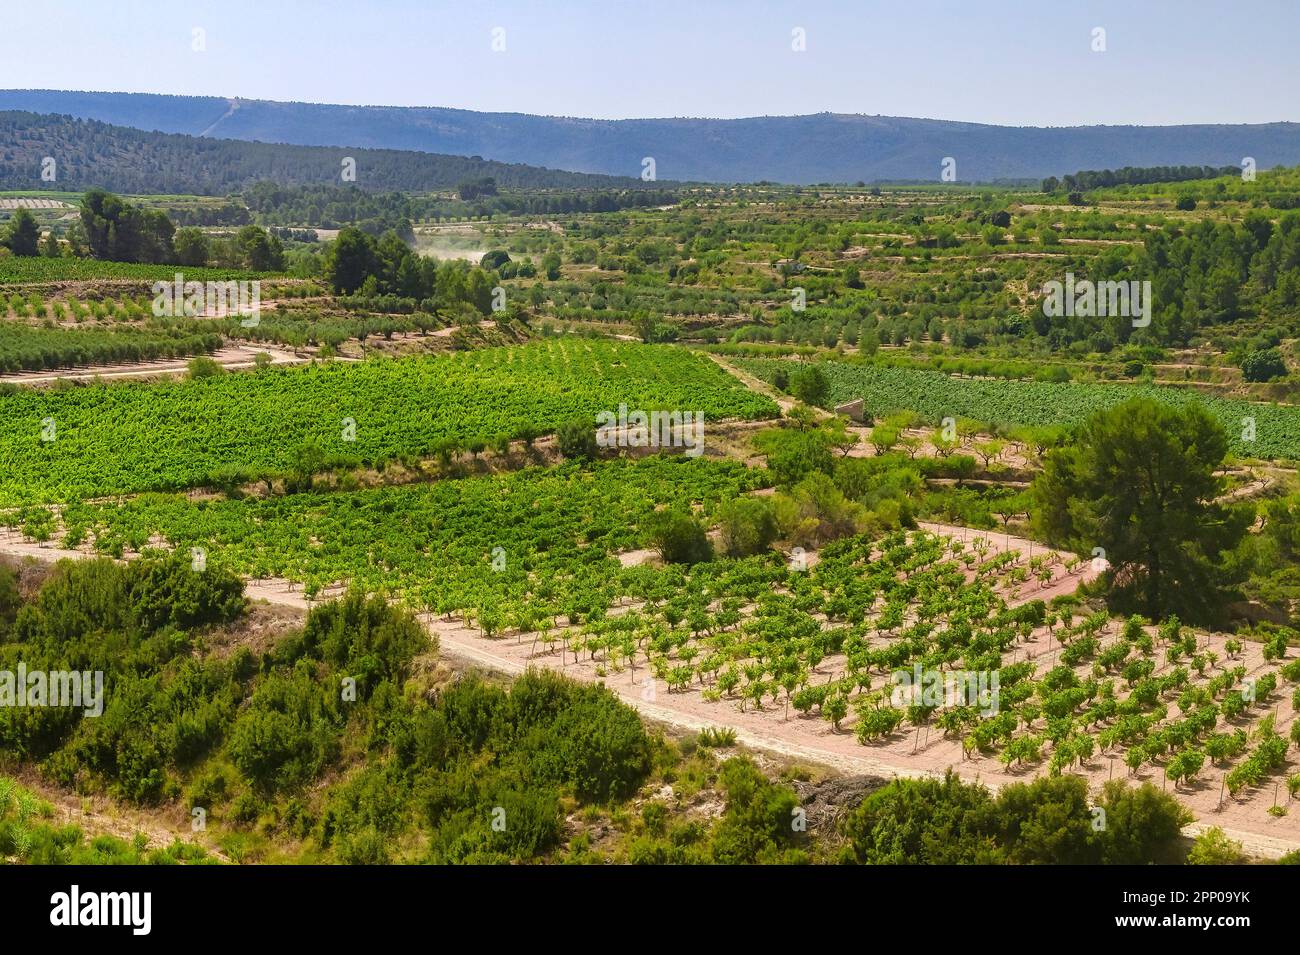 Spanish agriculture field with no people Stock Photo